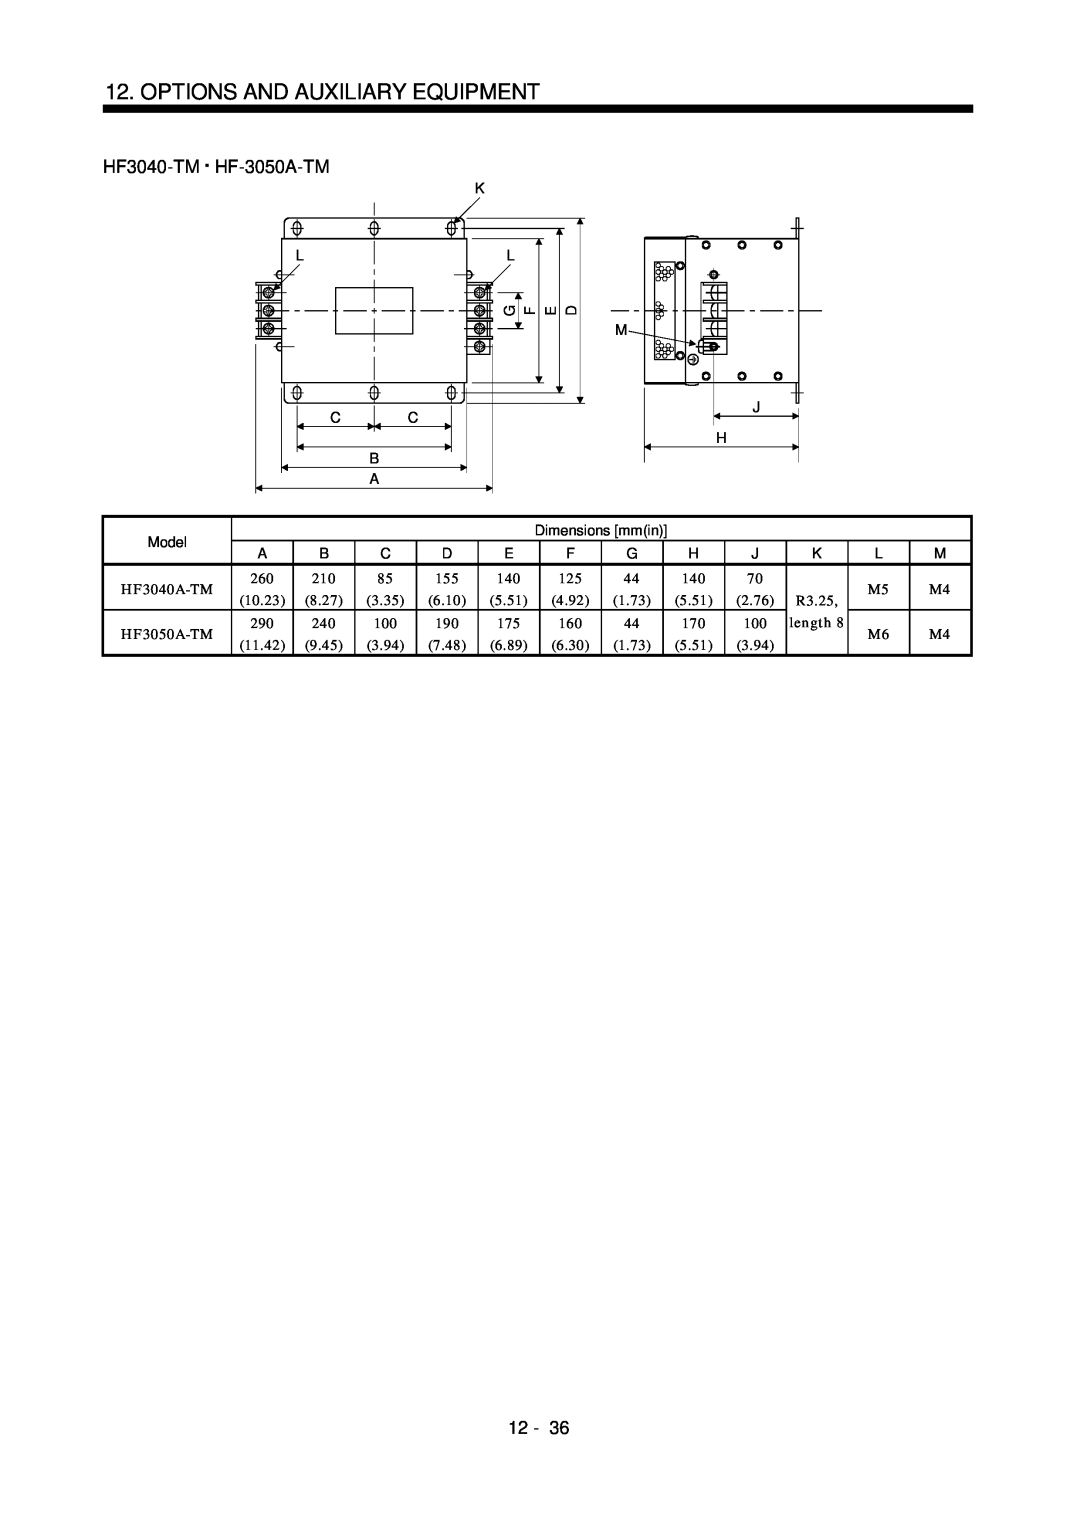 Bose MR-J2S- B instruction manual HF3040-TM HF-3050A-TM, Options And Auxiliary Equipment, 12 